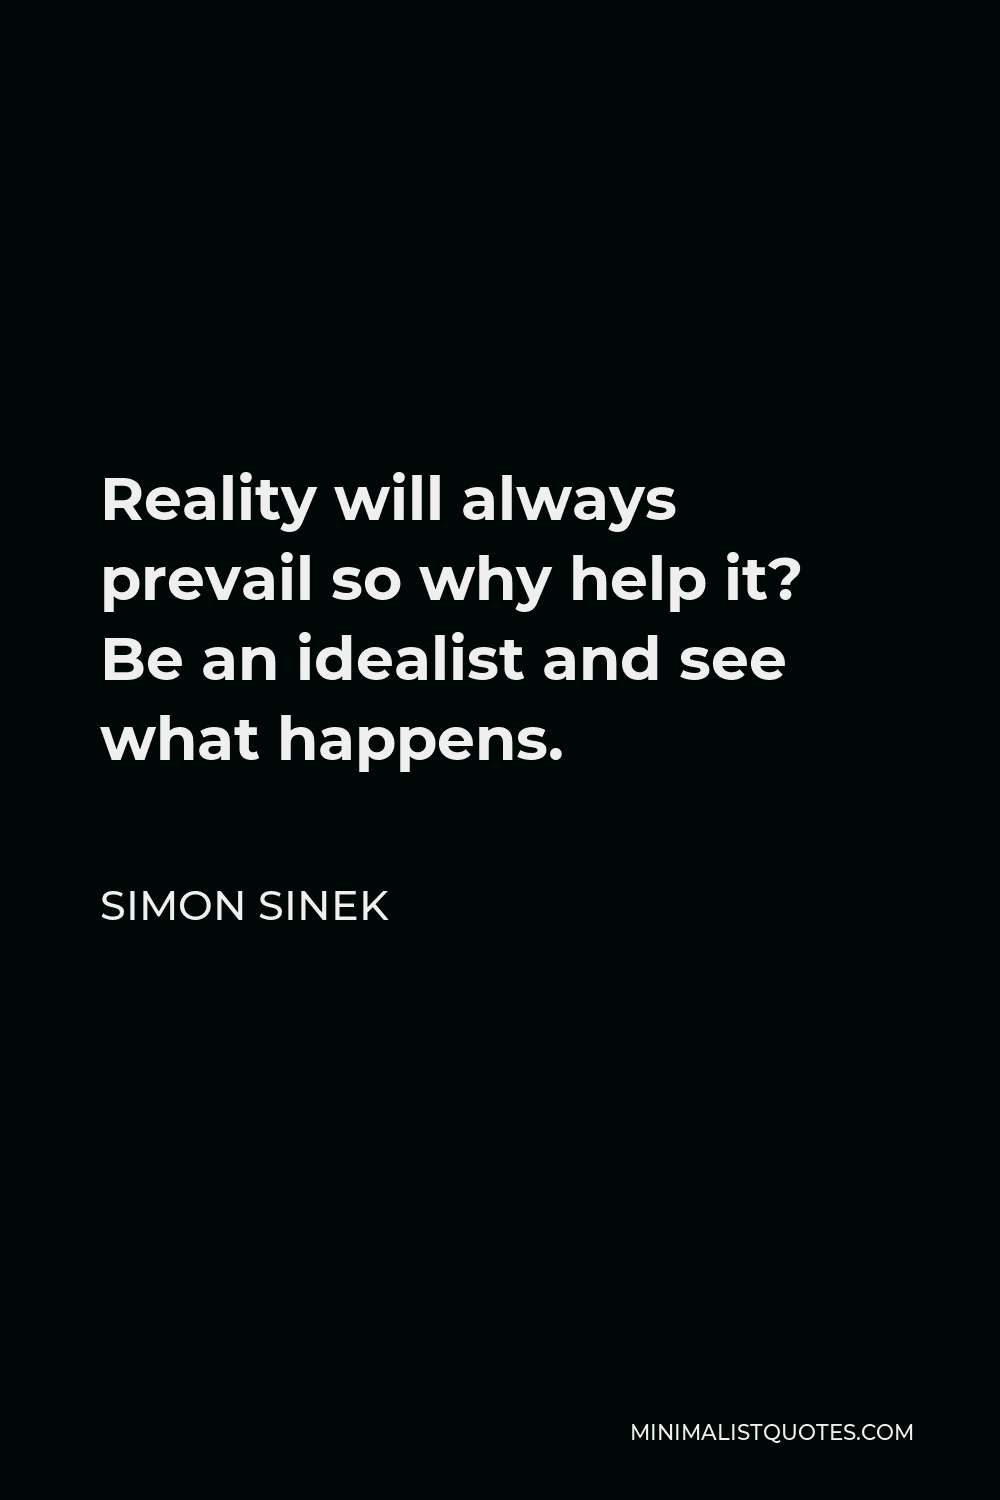 Simon Sinek Quote - Reality will always prevail so why help it? Be an idealist and see what happens.